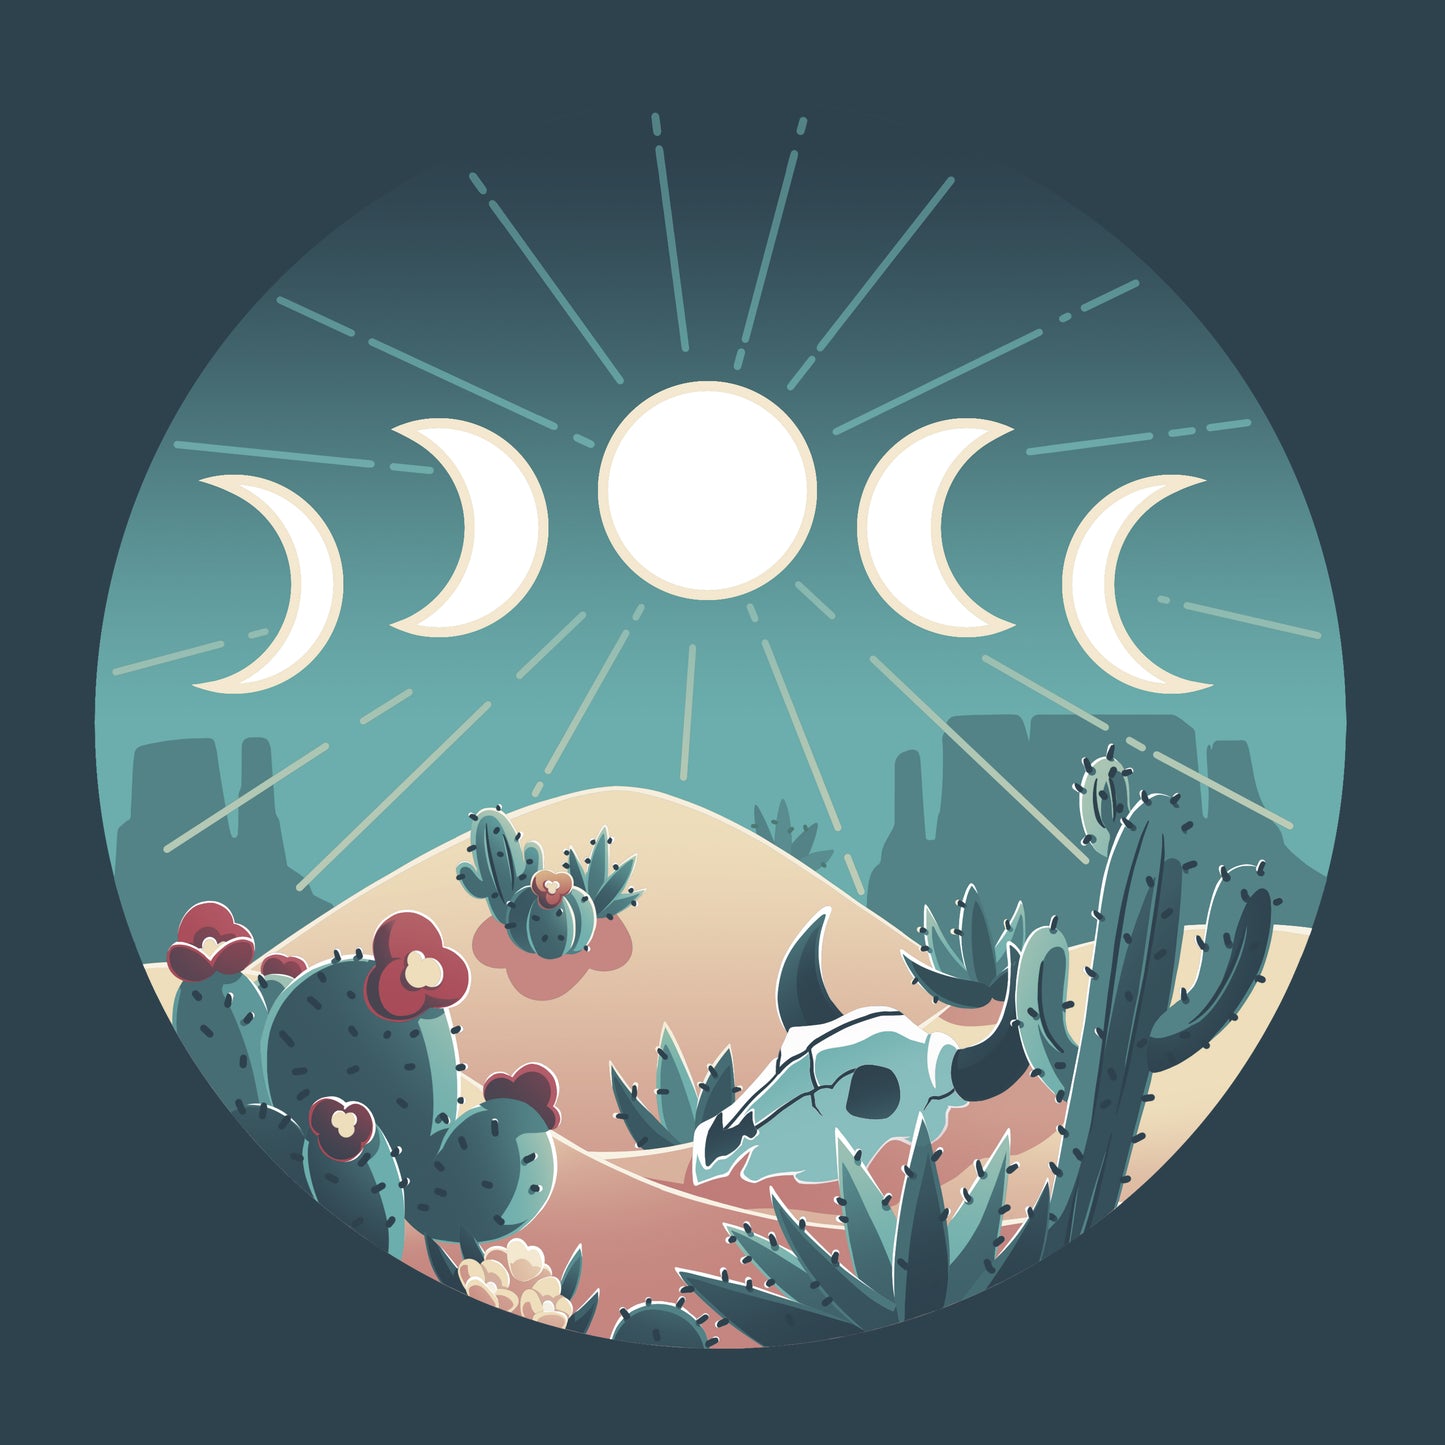 A Desert Moons scene with cactus plants and a cow, perfect for stargazing or wearing on a TeeTurtle t-shirt.